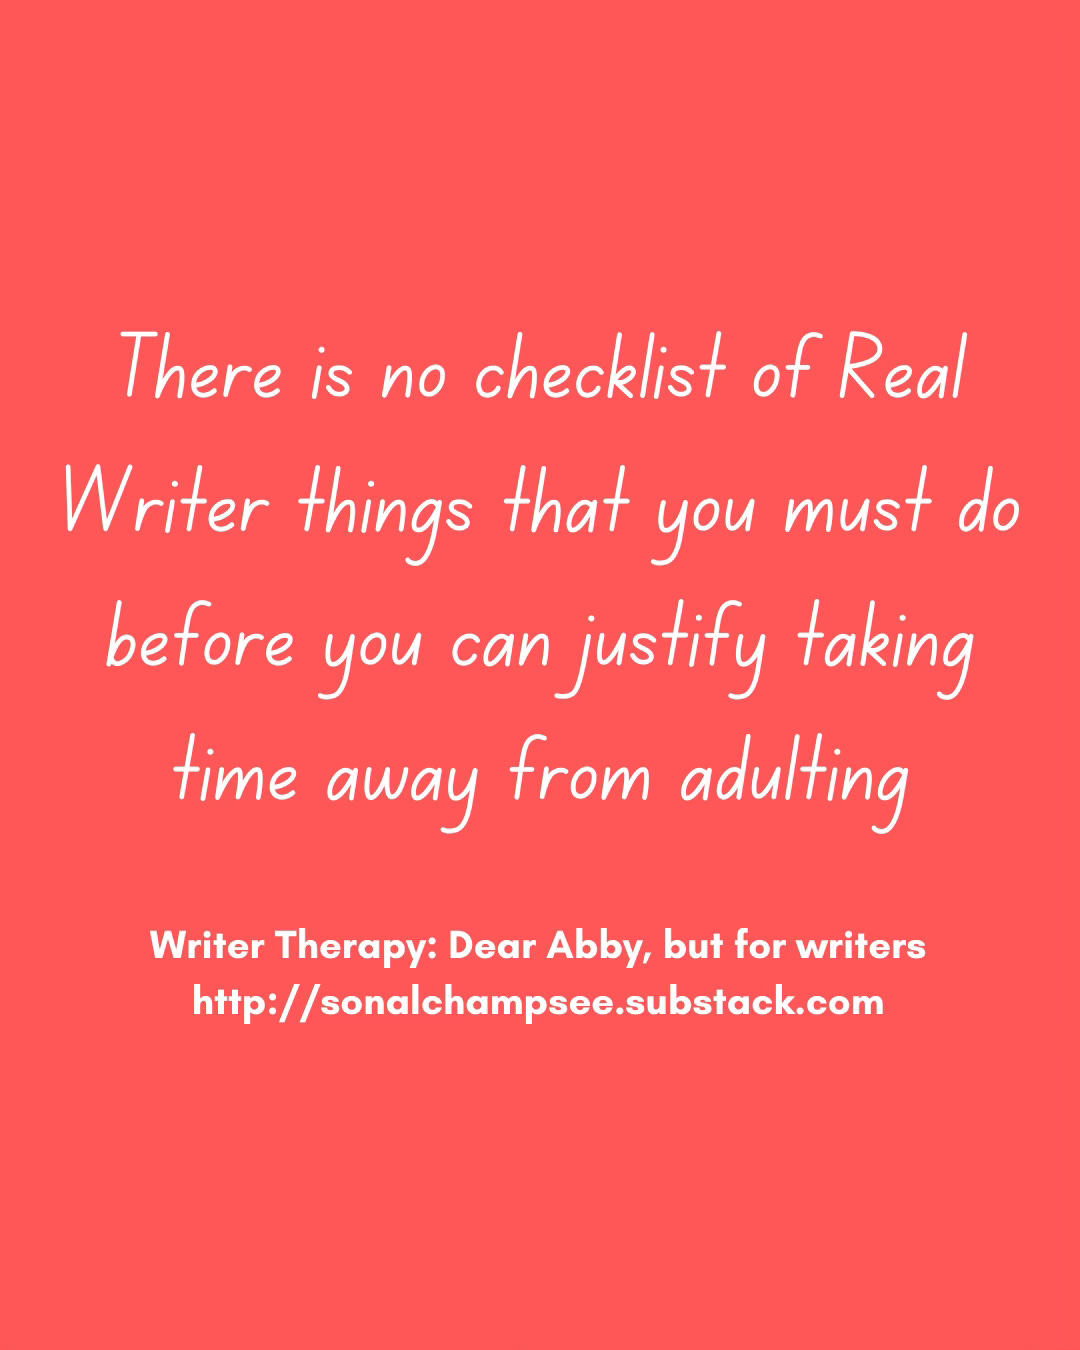 There is no checklist of Real Writer things that you must do before you can justify taking time away from adulting